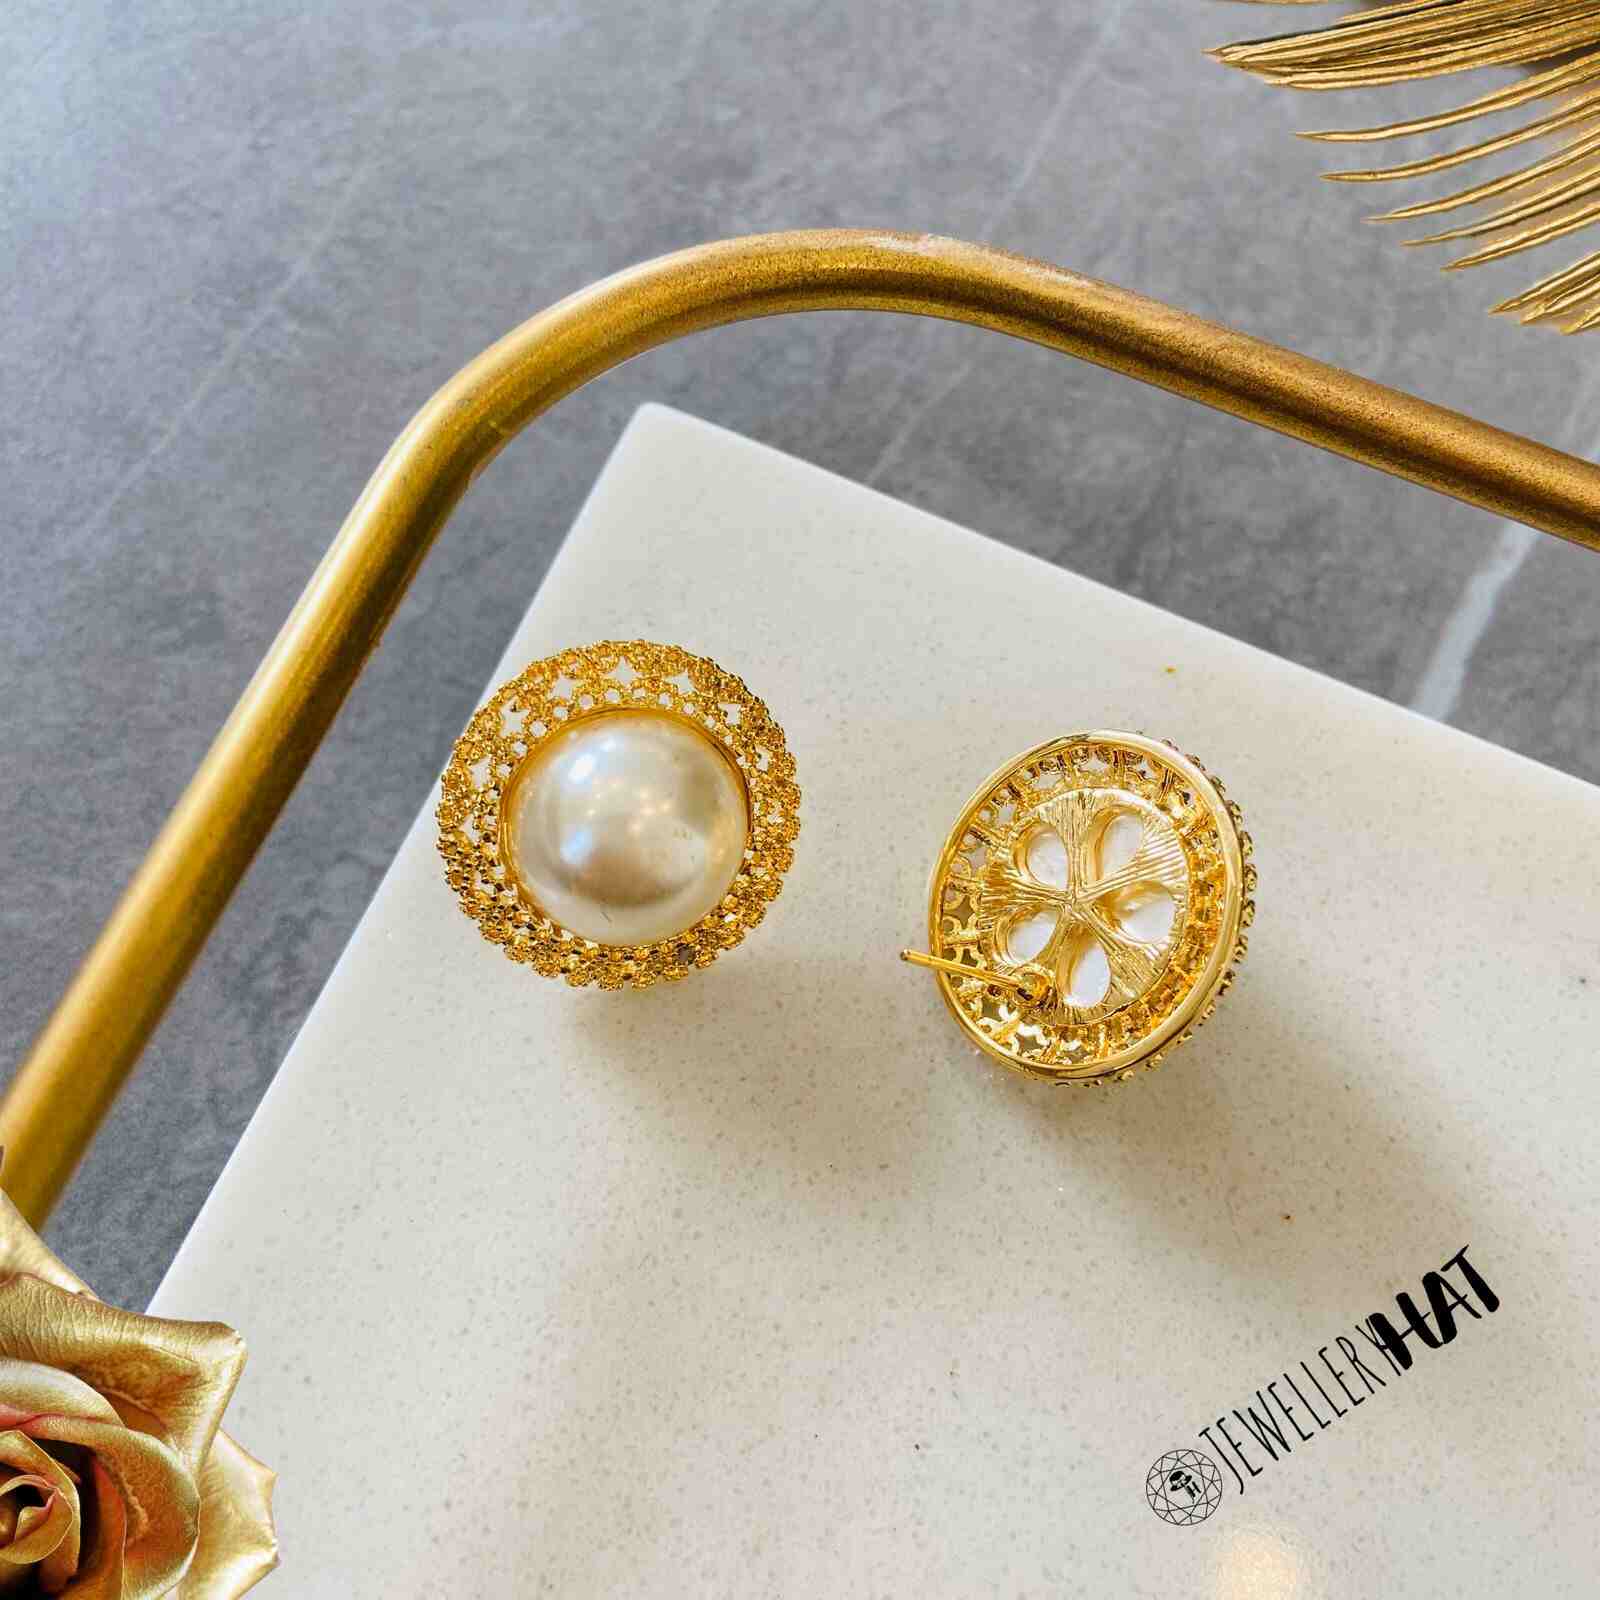 Gold Stud Earrings with Pearl